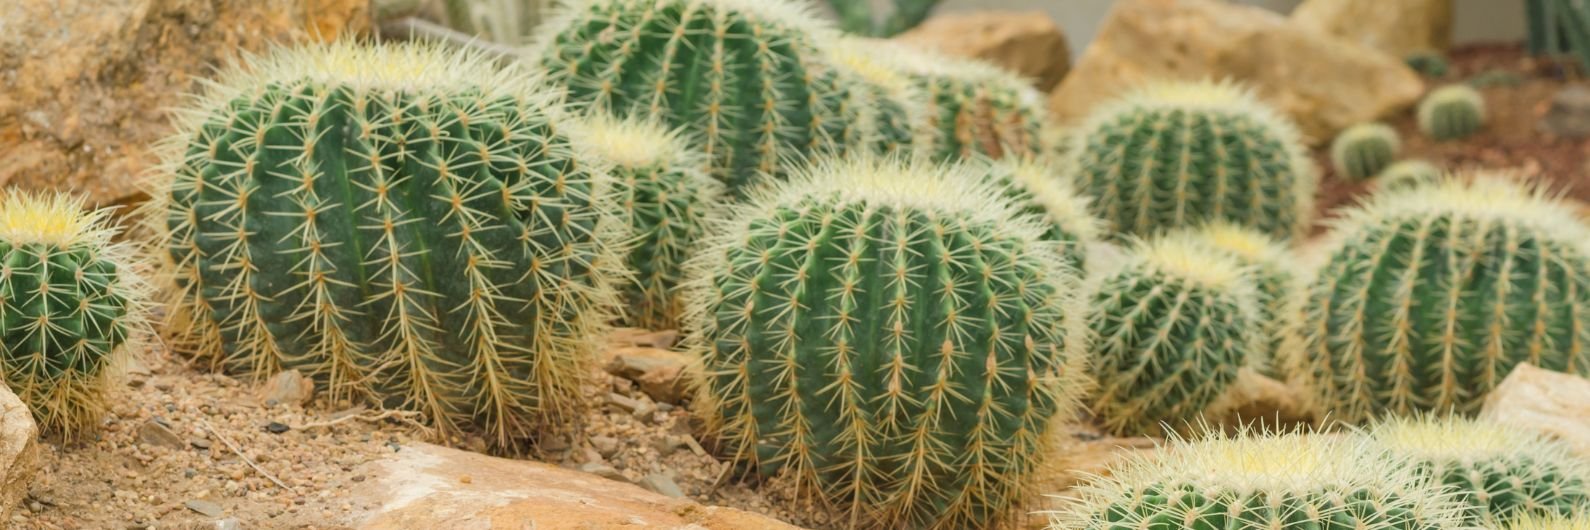 The Complete Common Fishhook Cactus Plant Care Guide: Water, Light